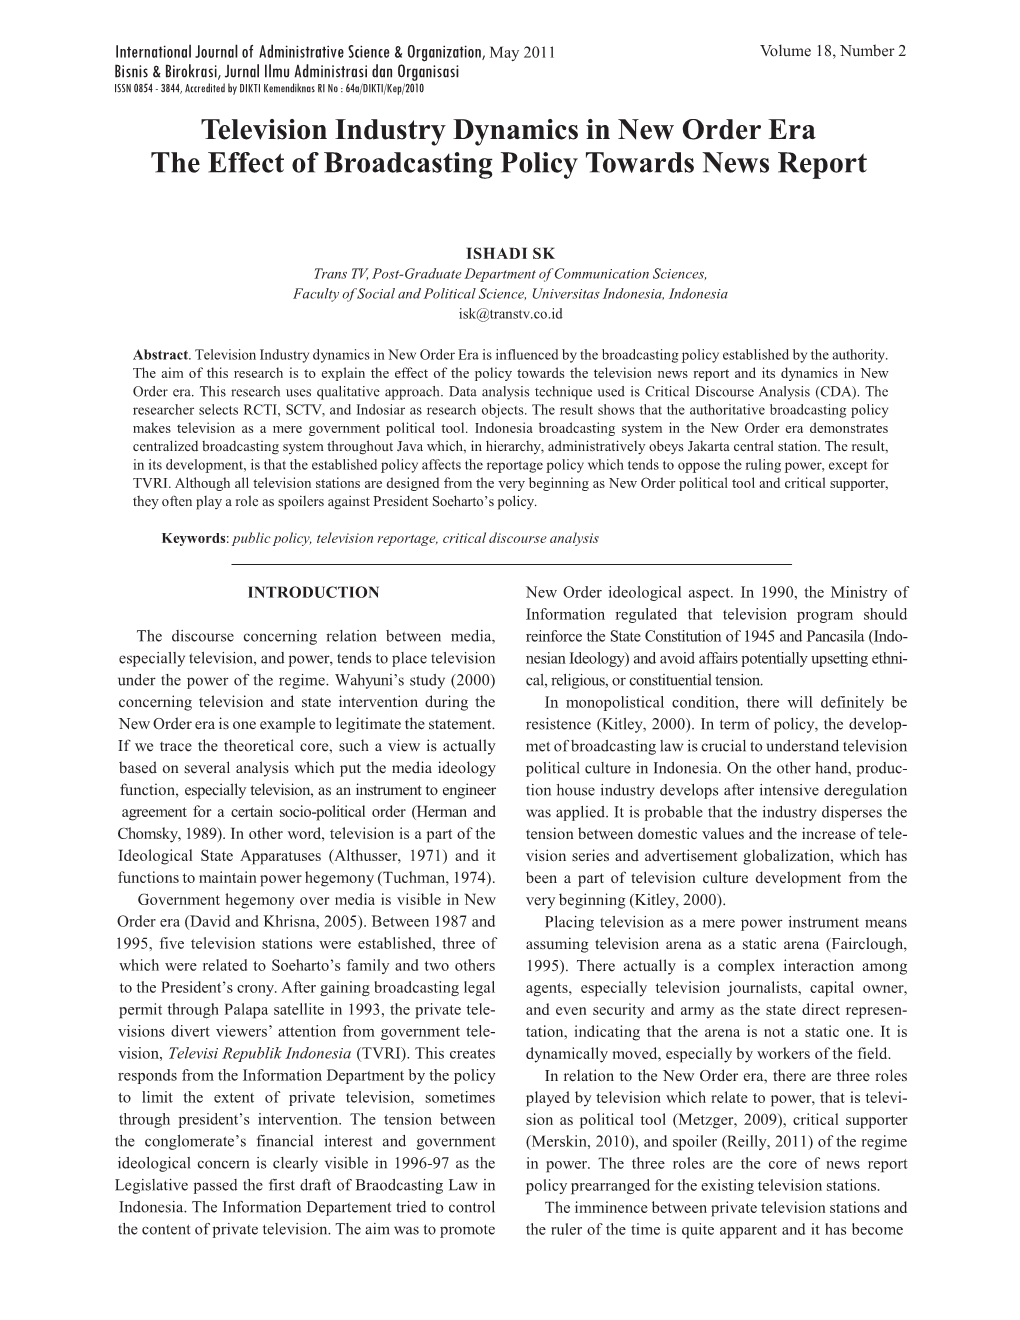 Television Industry Dynamics in New Order Era the Effect of Broadcasting Policy Towards News Report